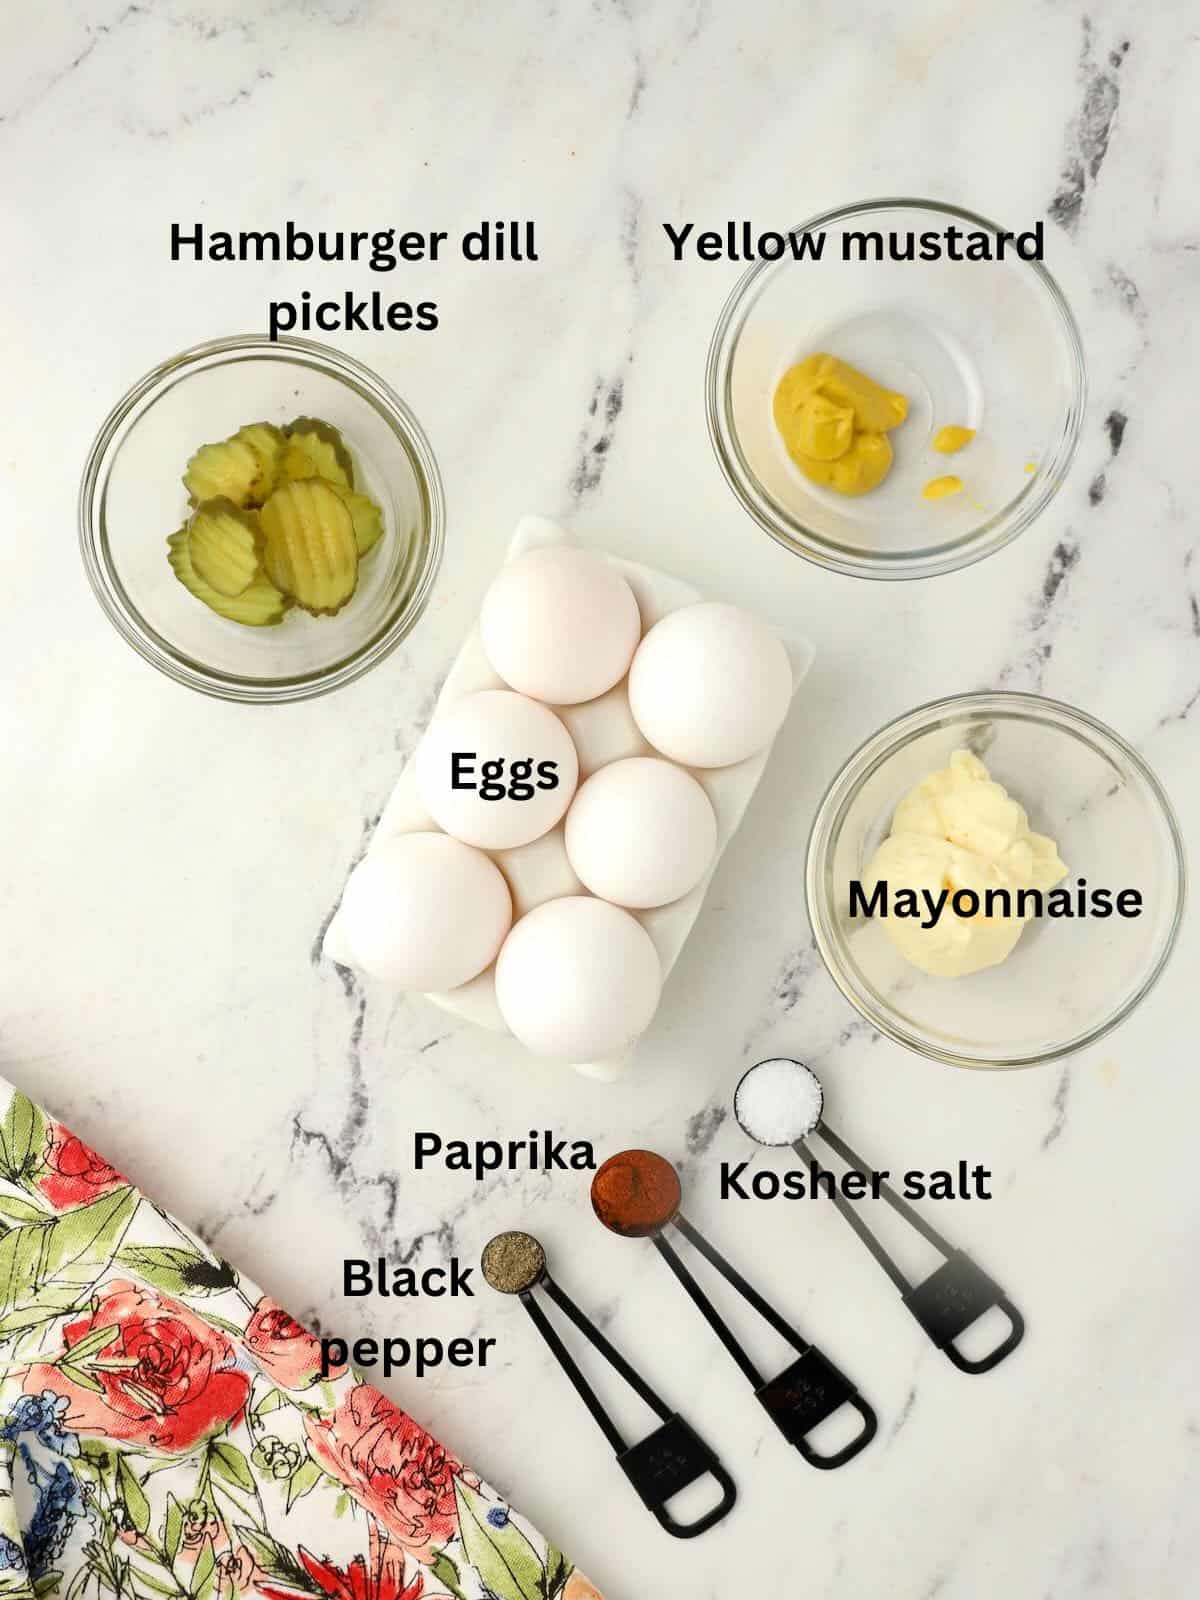 Ingredients for deviled eggs include eggs, pickles, mayonnaise, and mustard on a counter. 